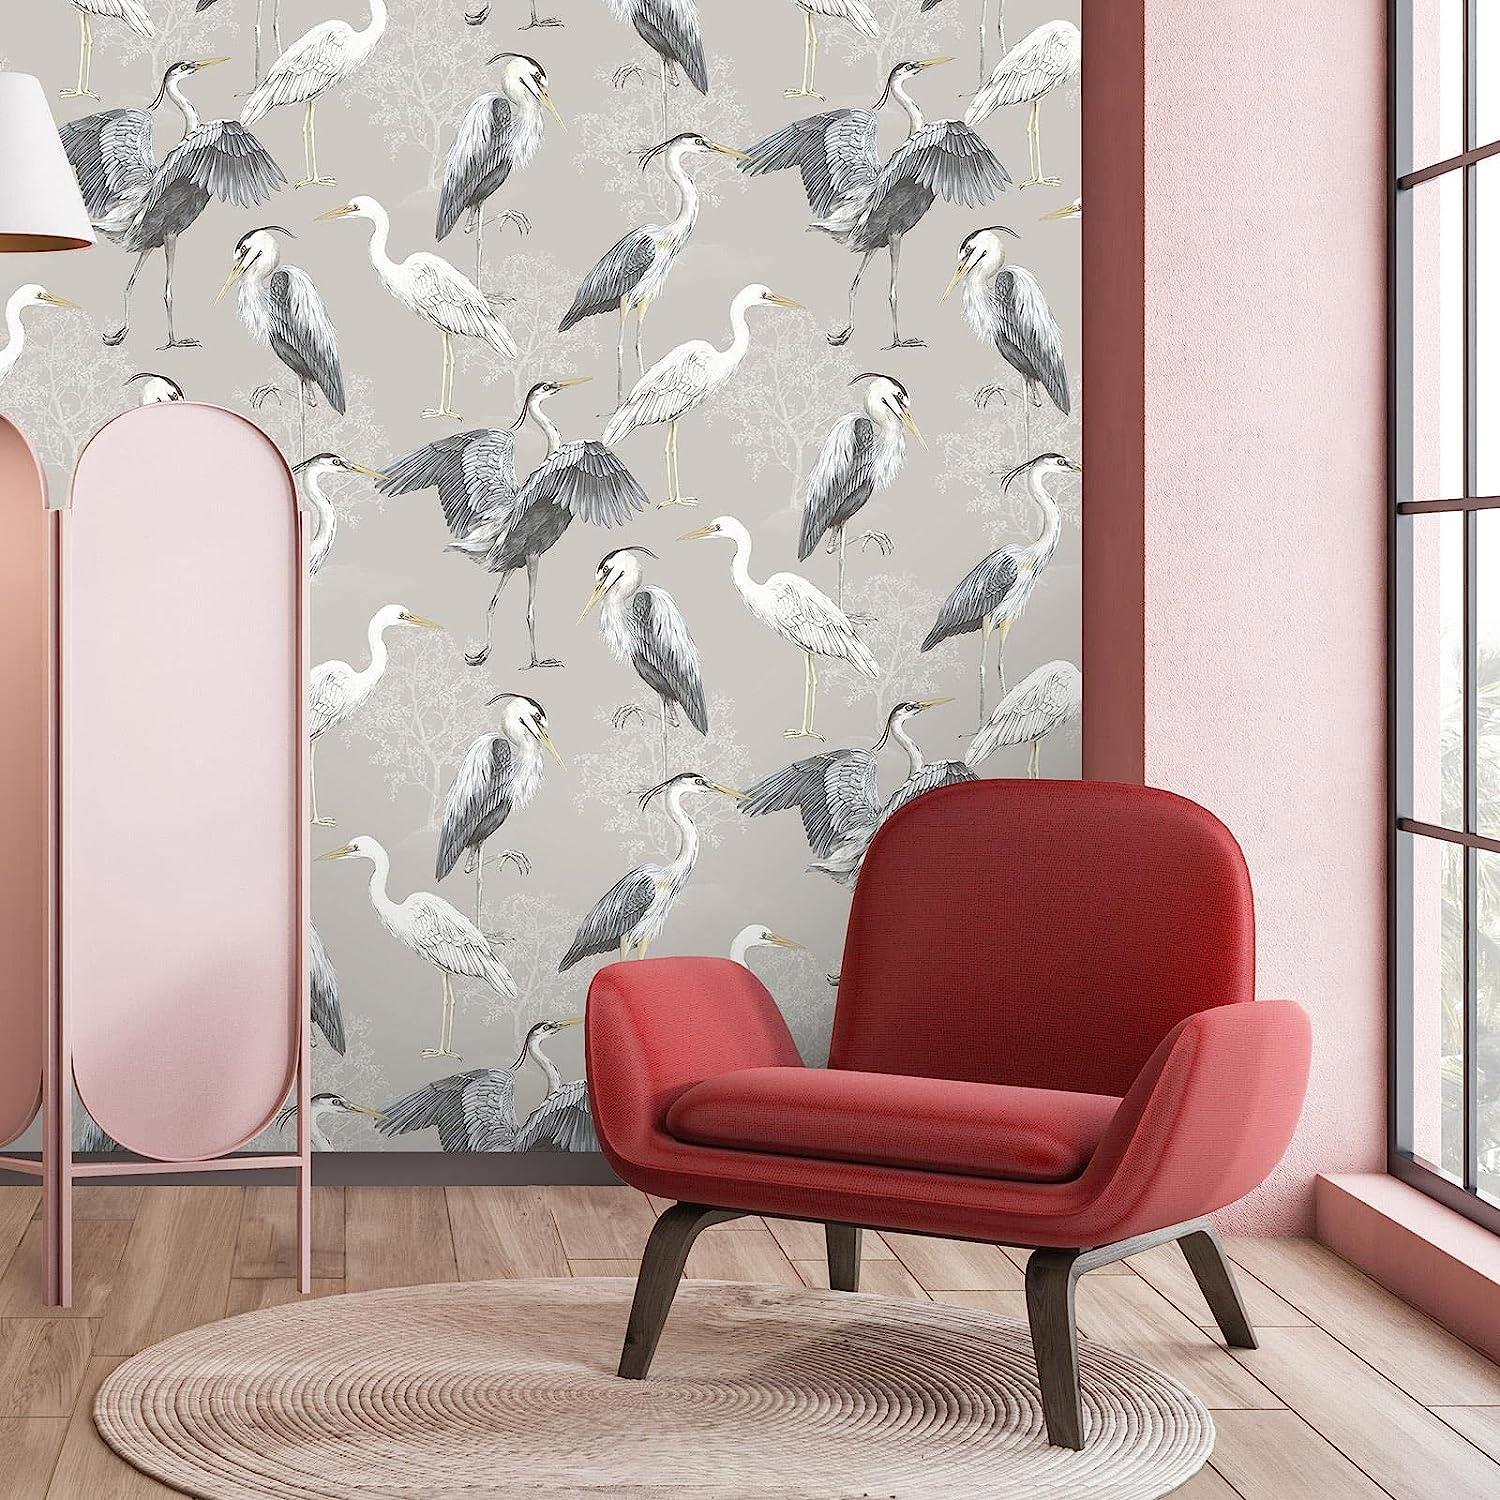 RASCH (U.K) Limited Dimension Heron Wallpaper - Modern Wallpaper for Living Room, Bedroom, Fireplace - Decorative Luxury Nature Wall Paper with Hand-Drawn Herons & Trees (White/Grey/Beige)